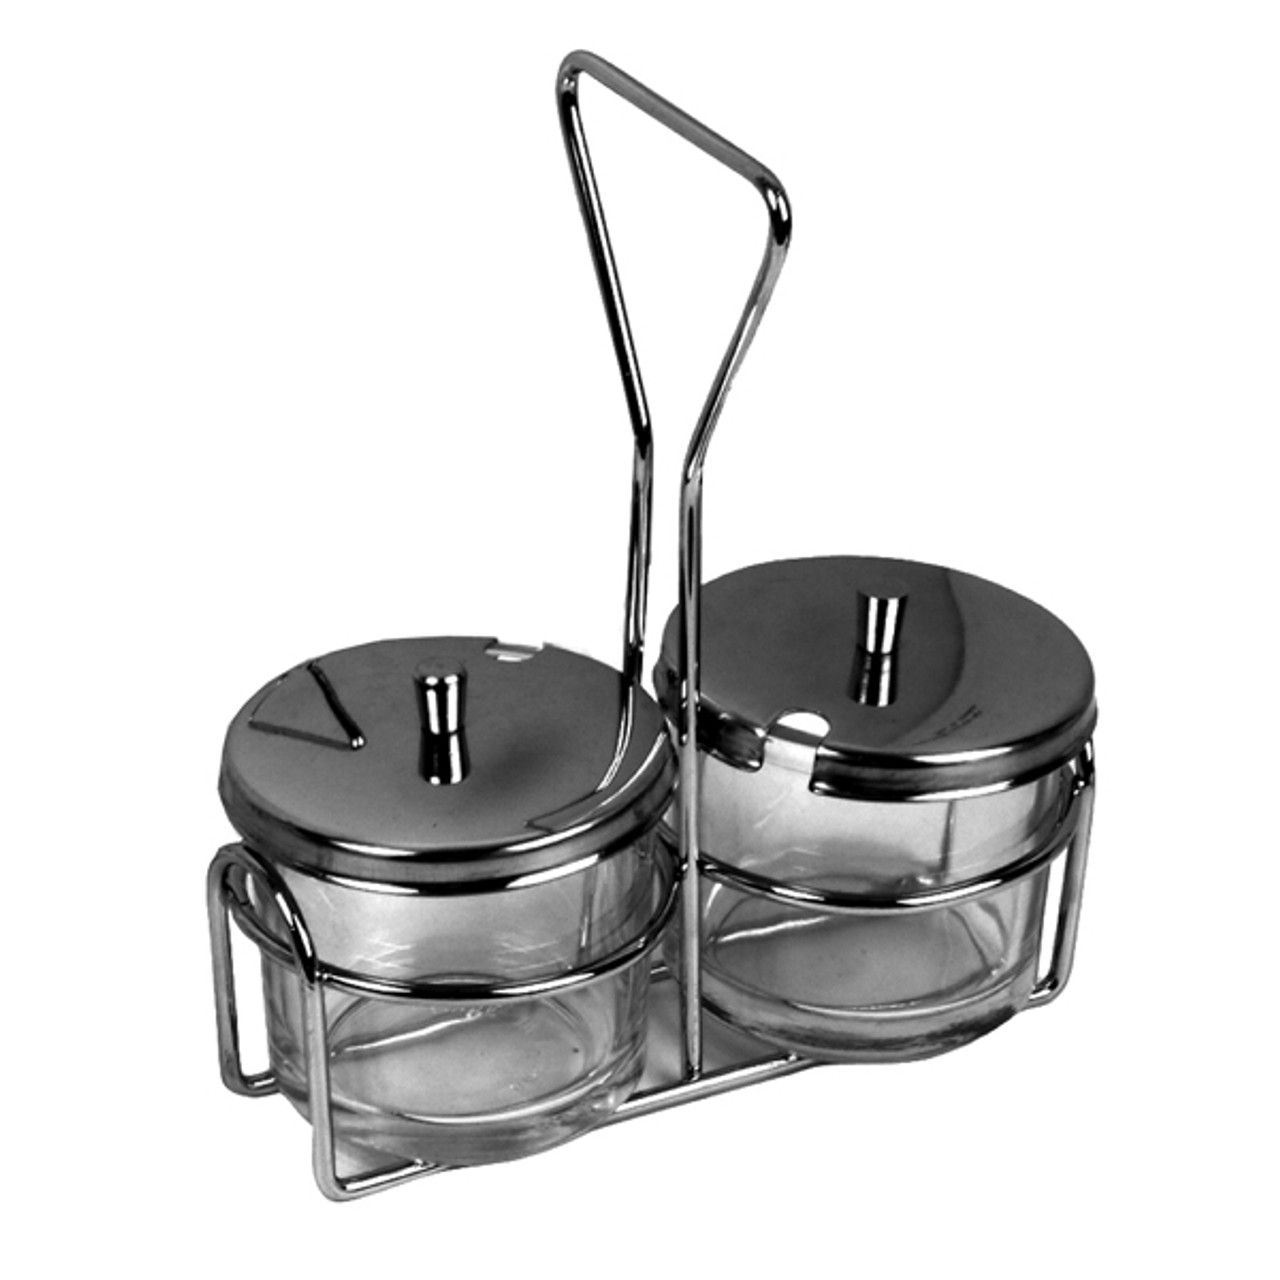 https://cdn11.bigcommerce.com/s-3n1nnt5qyw/images/stencil/1280x1280/products/27688/30269/thunder-group-2-holes-condiment-jar-holder-model-slcjh002-12__51074.1629773631.jpg?c=1